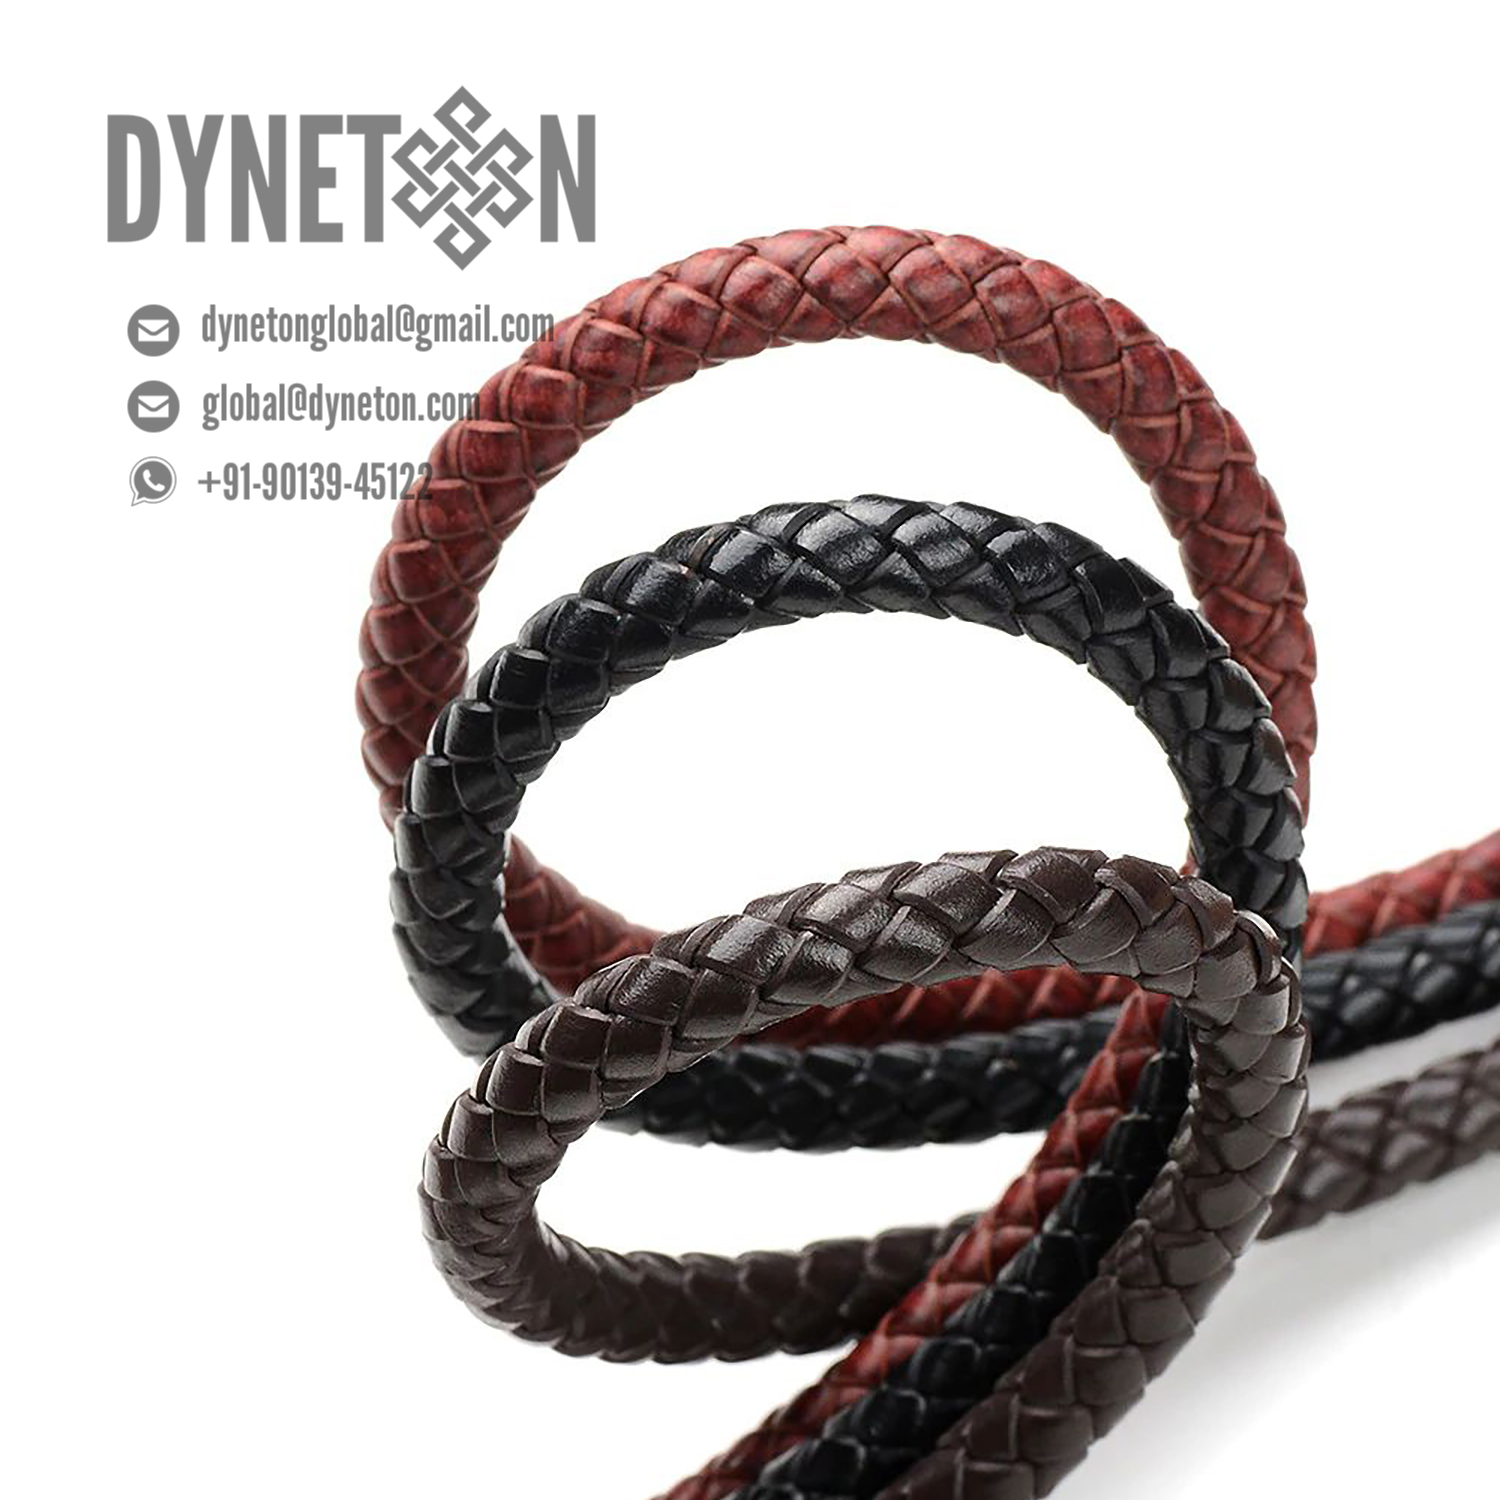 2.5mm Round Leather Cord - Dyneton Global